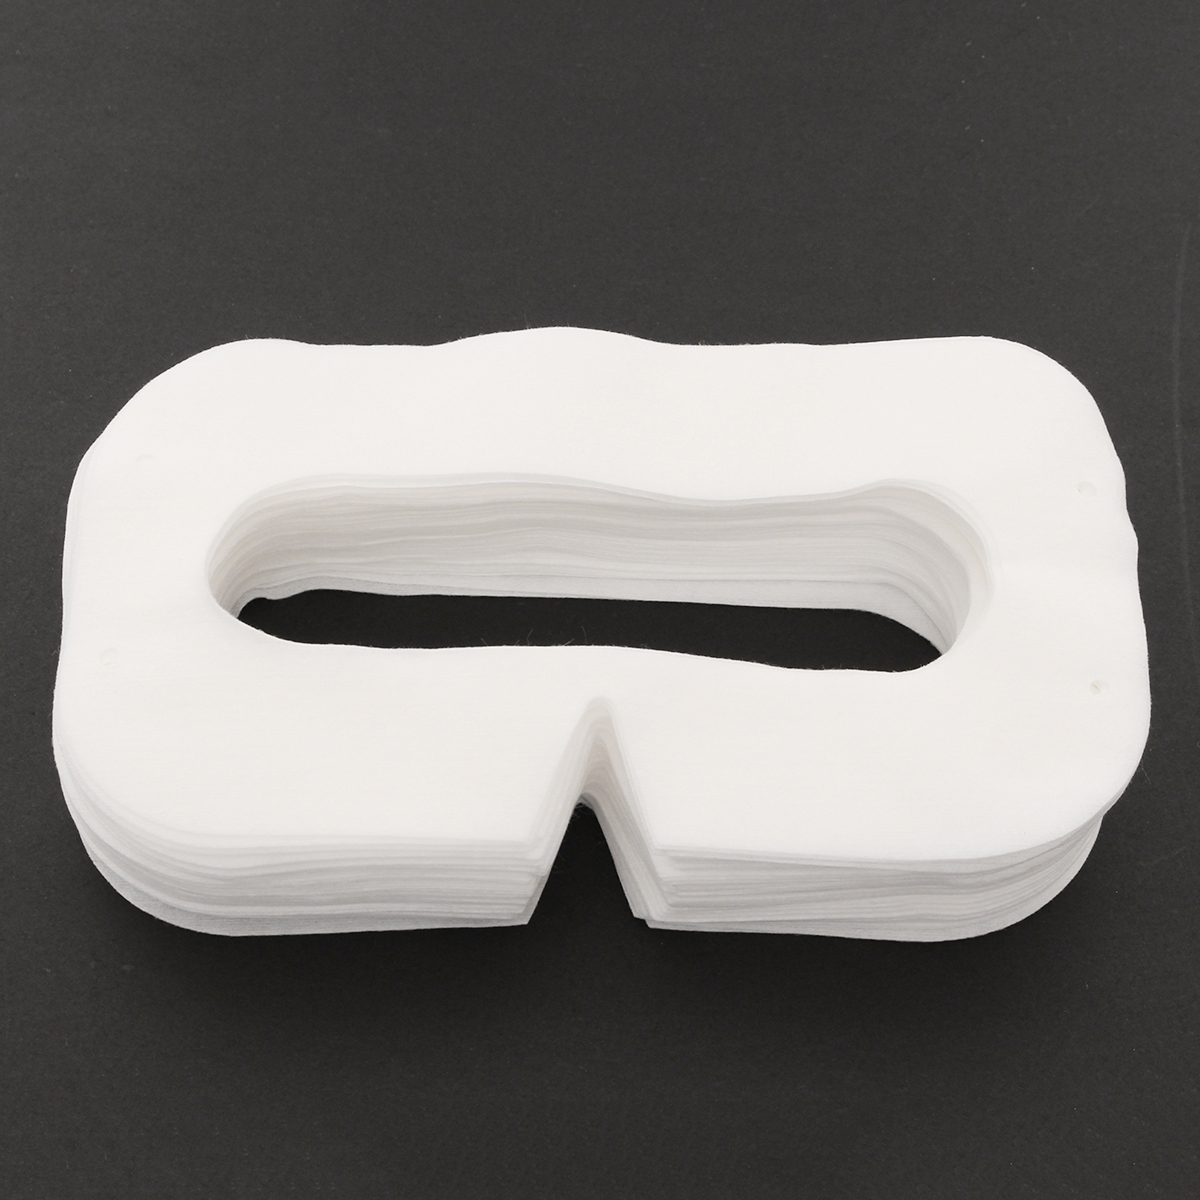 50-PCS-Disposable-Hygiene-Eye-pad-Face-Mask-for-HTC-Vive-for-PlayStation-VR-Headset-1213969